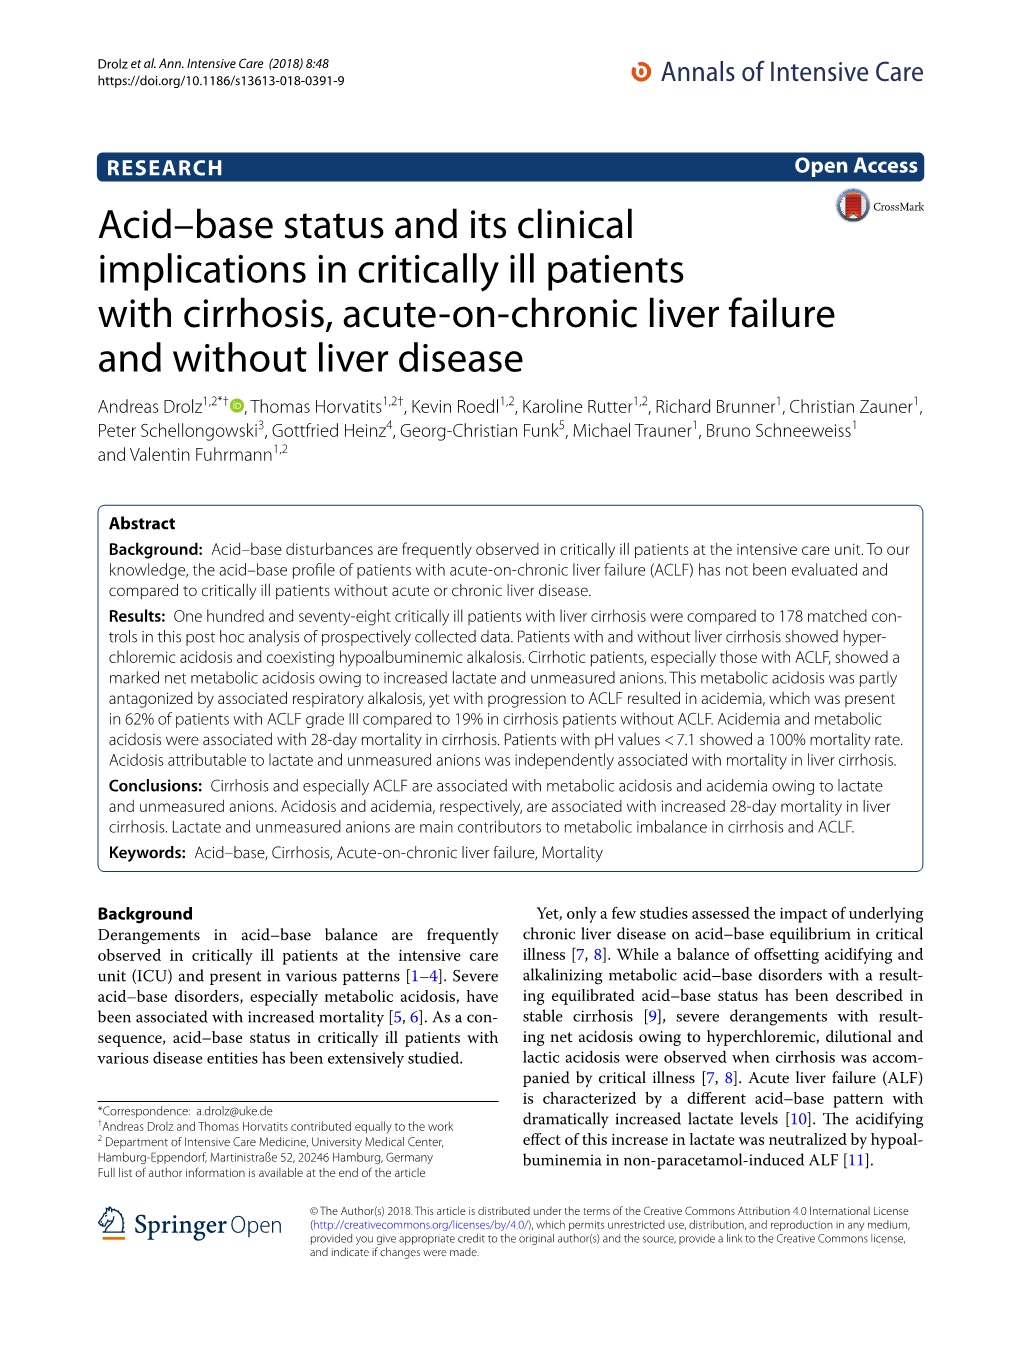 Acid–Base Status and Its Clinical Implications in Critically Ill Patients